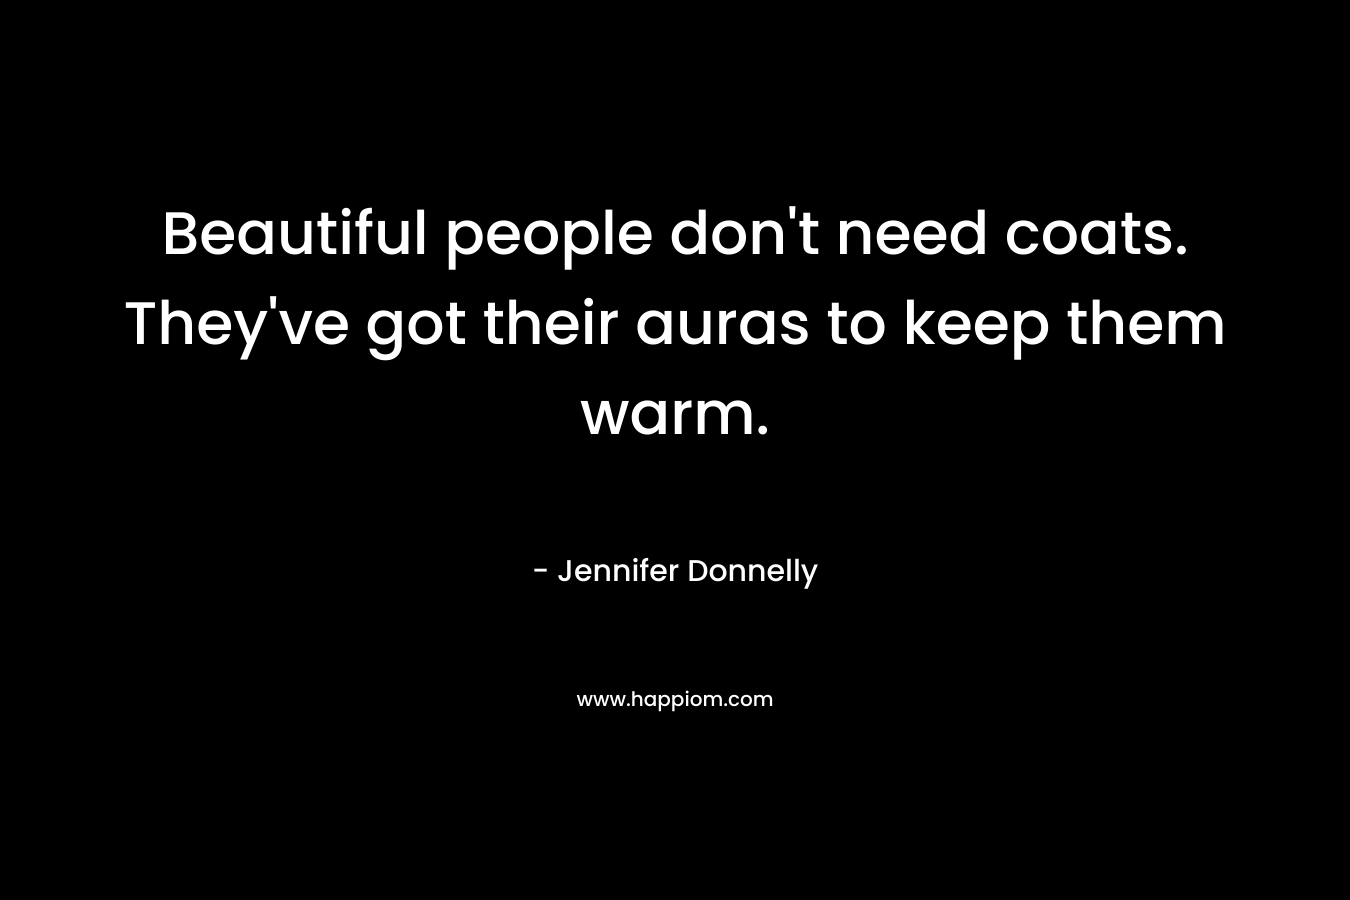 Beautiful people don’t need coats. They’ve got their auras to keep them warm. – Jennifer Donnelly